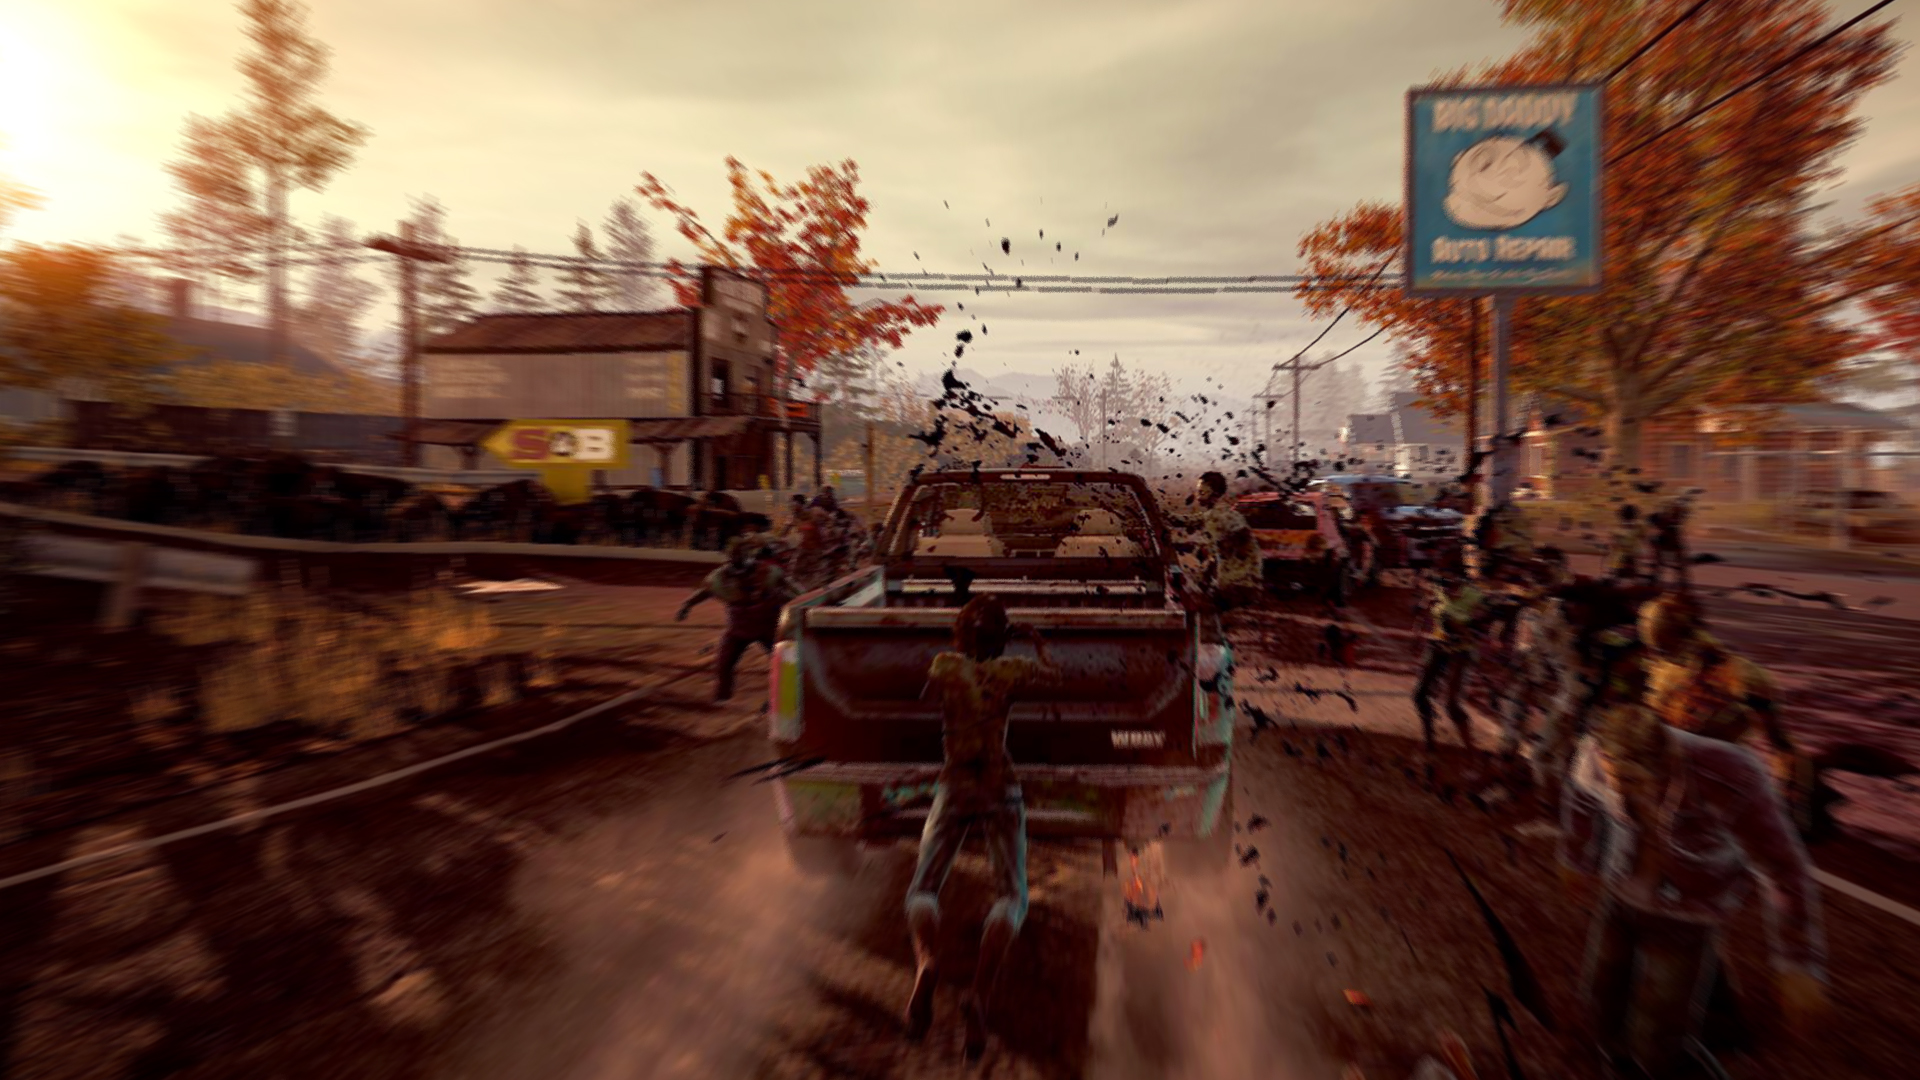 State of decay требования. State of Decay yose. Стейт оф Дикей 3. State of Decay 1. State of Decay 2 year one.